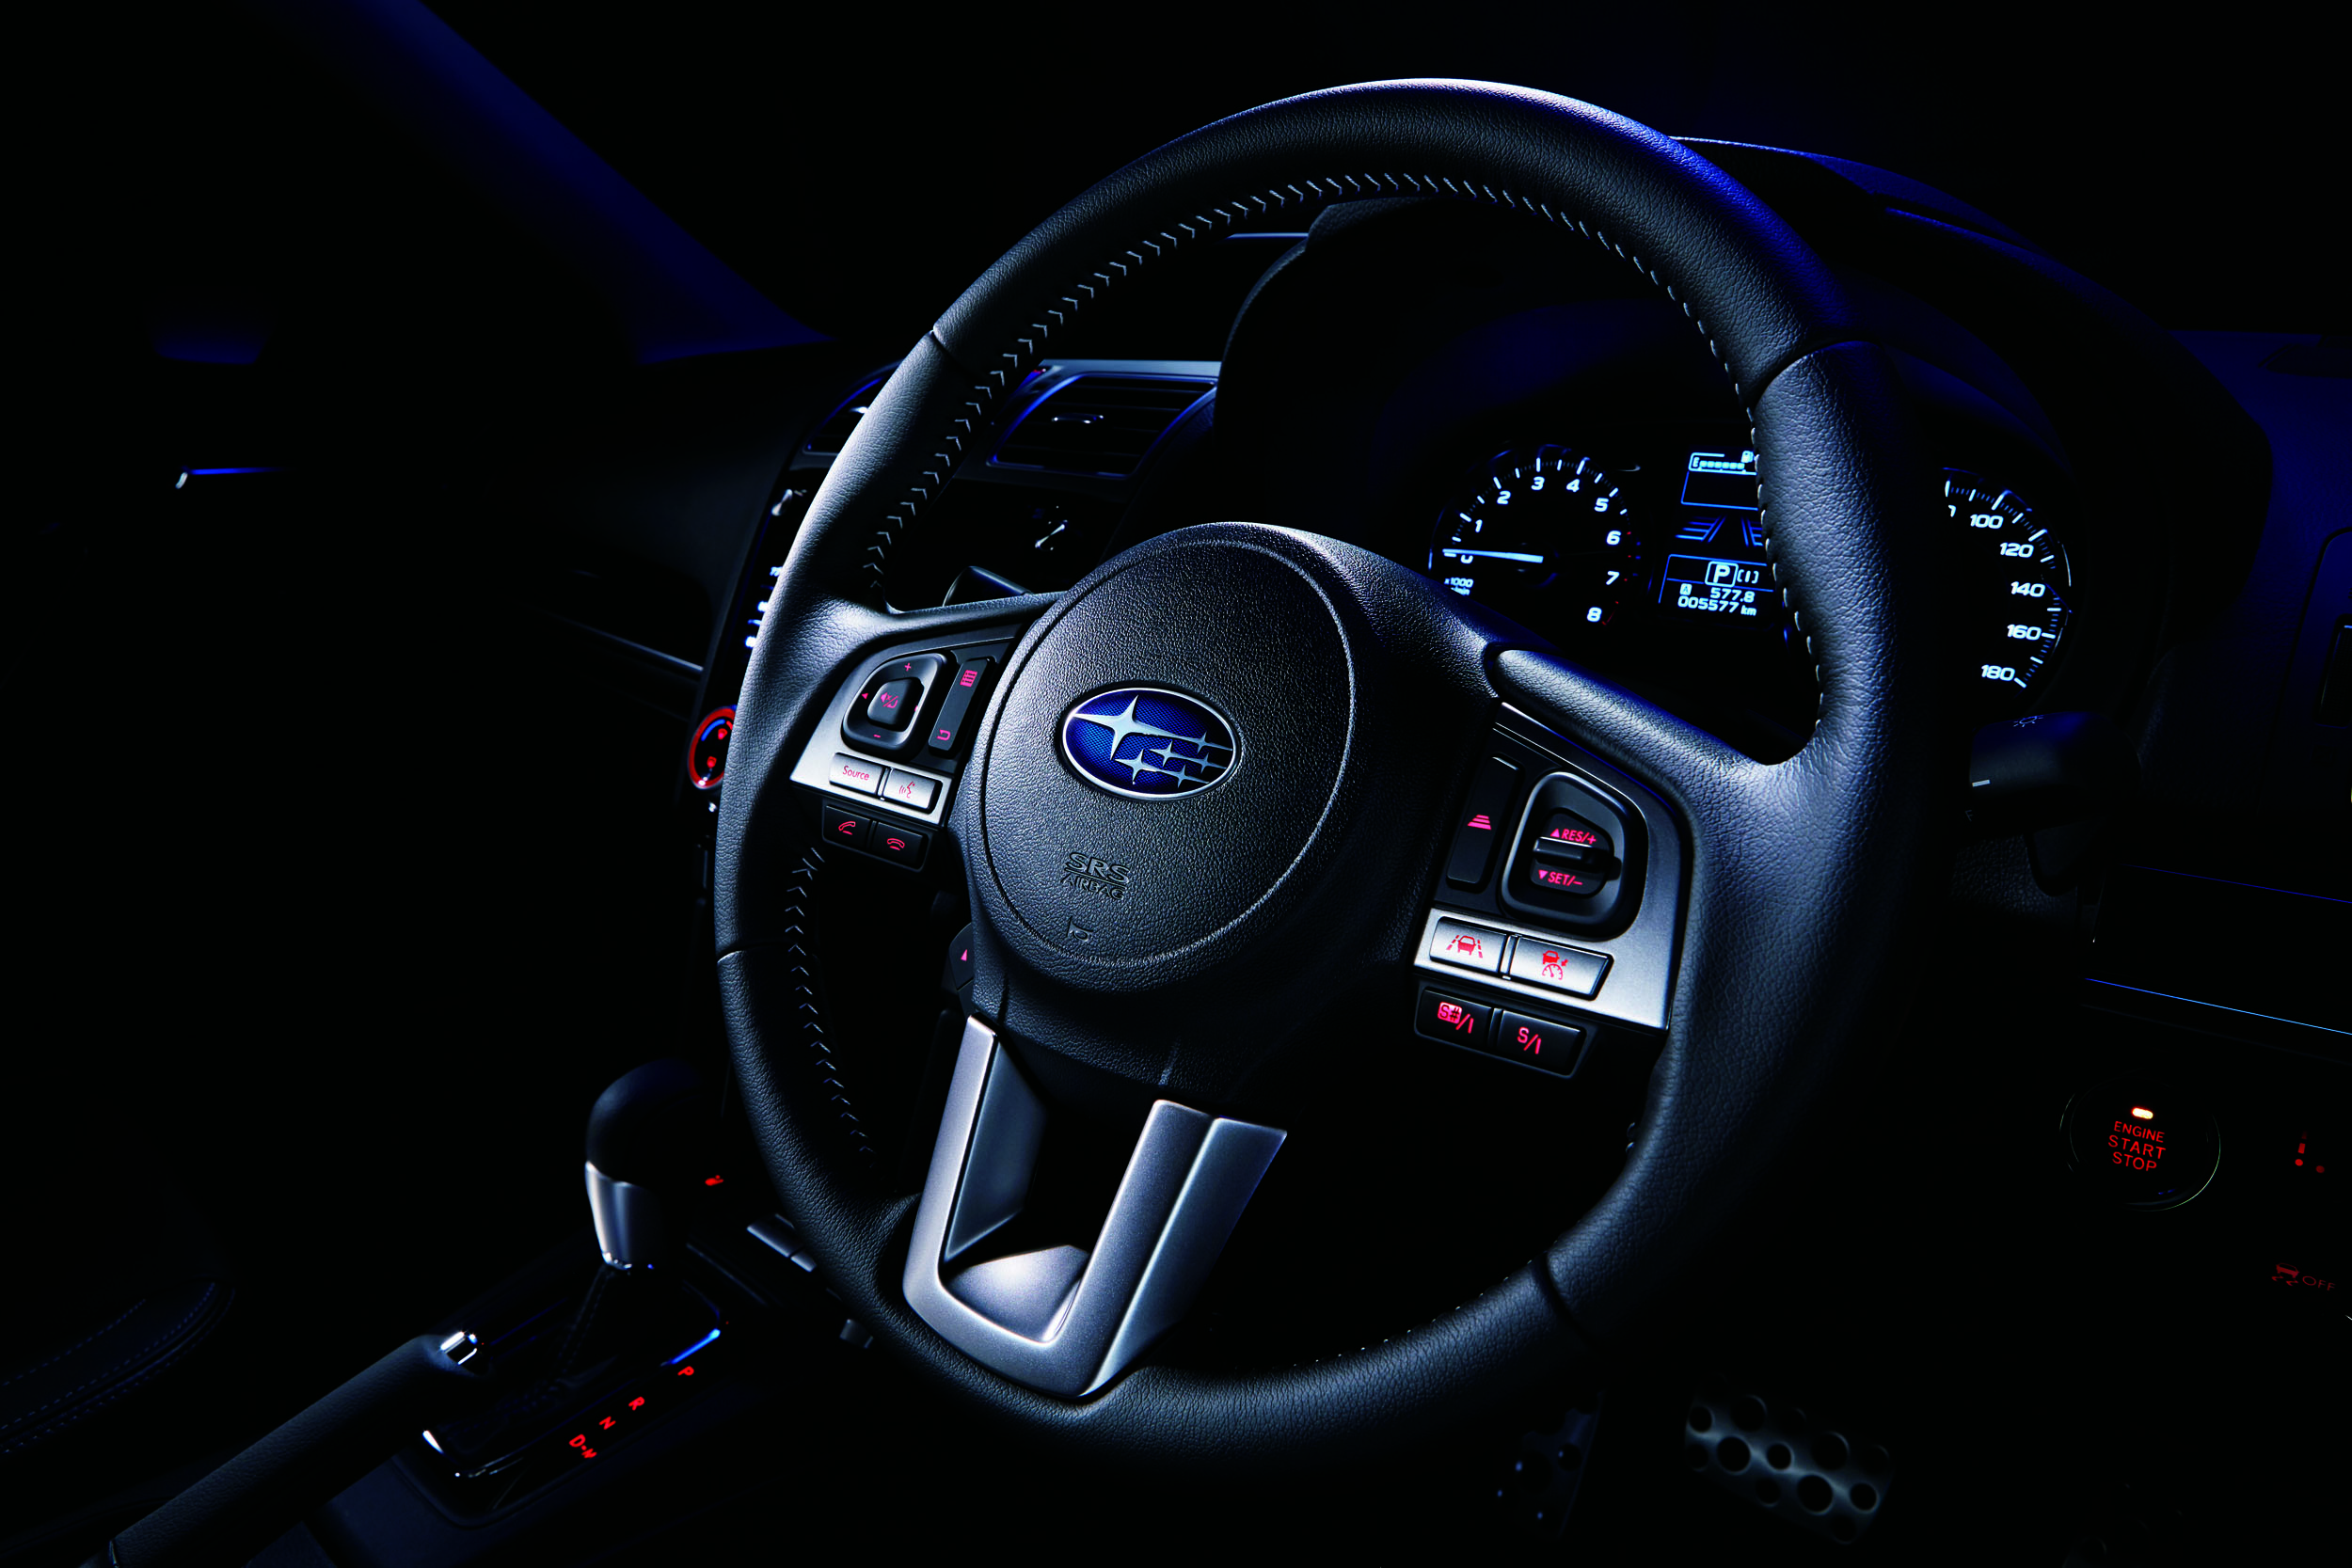 Subaru Forester Facelift steering wheel official